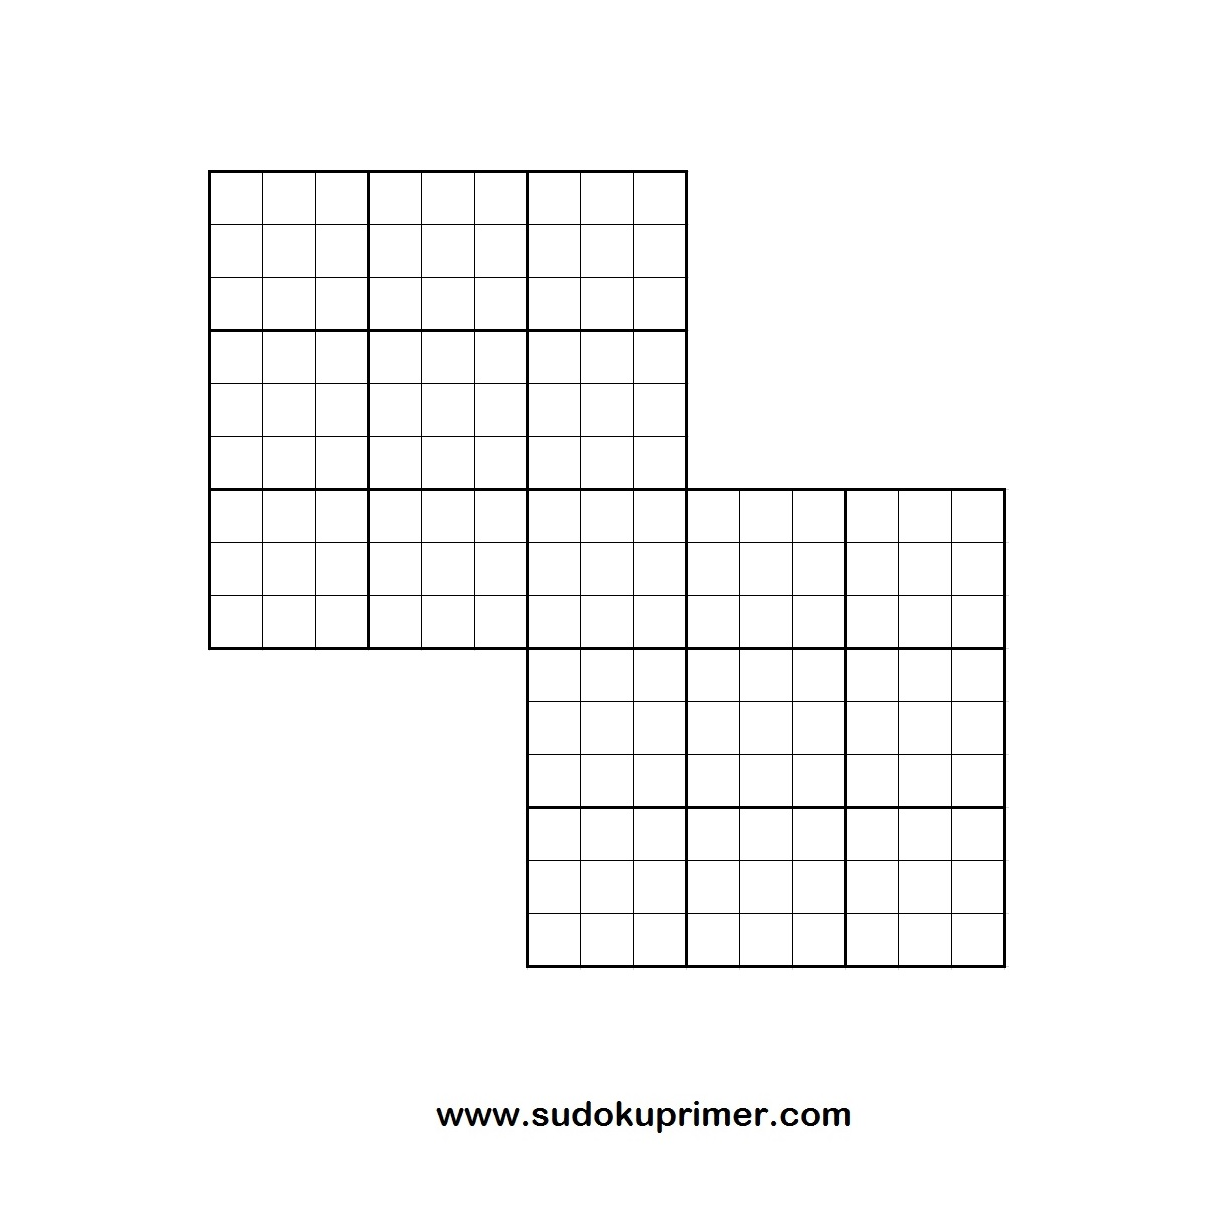 1 x 1 classic overlapping sudoku blank grid in .png format